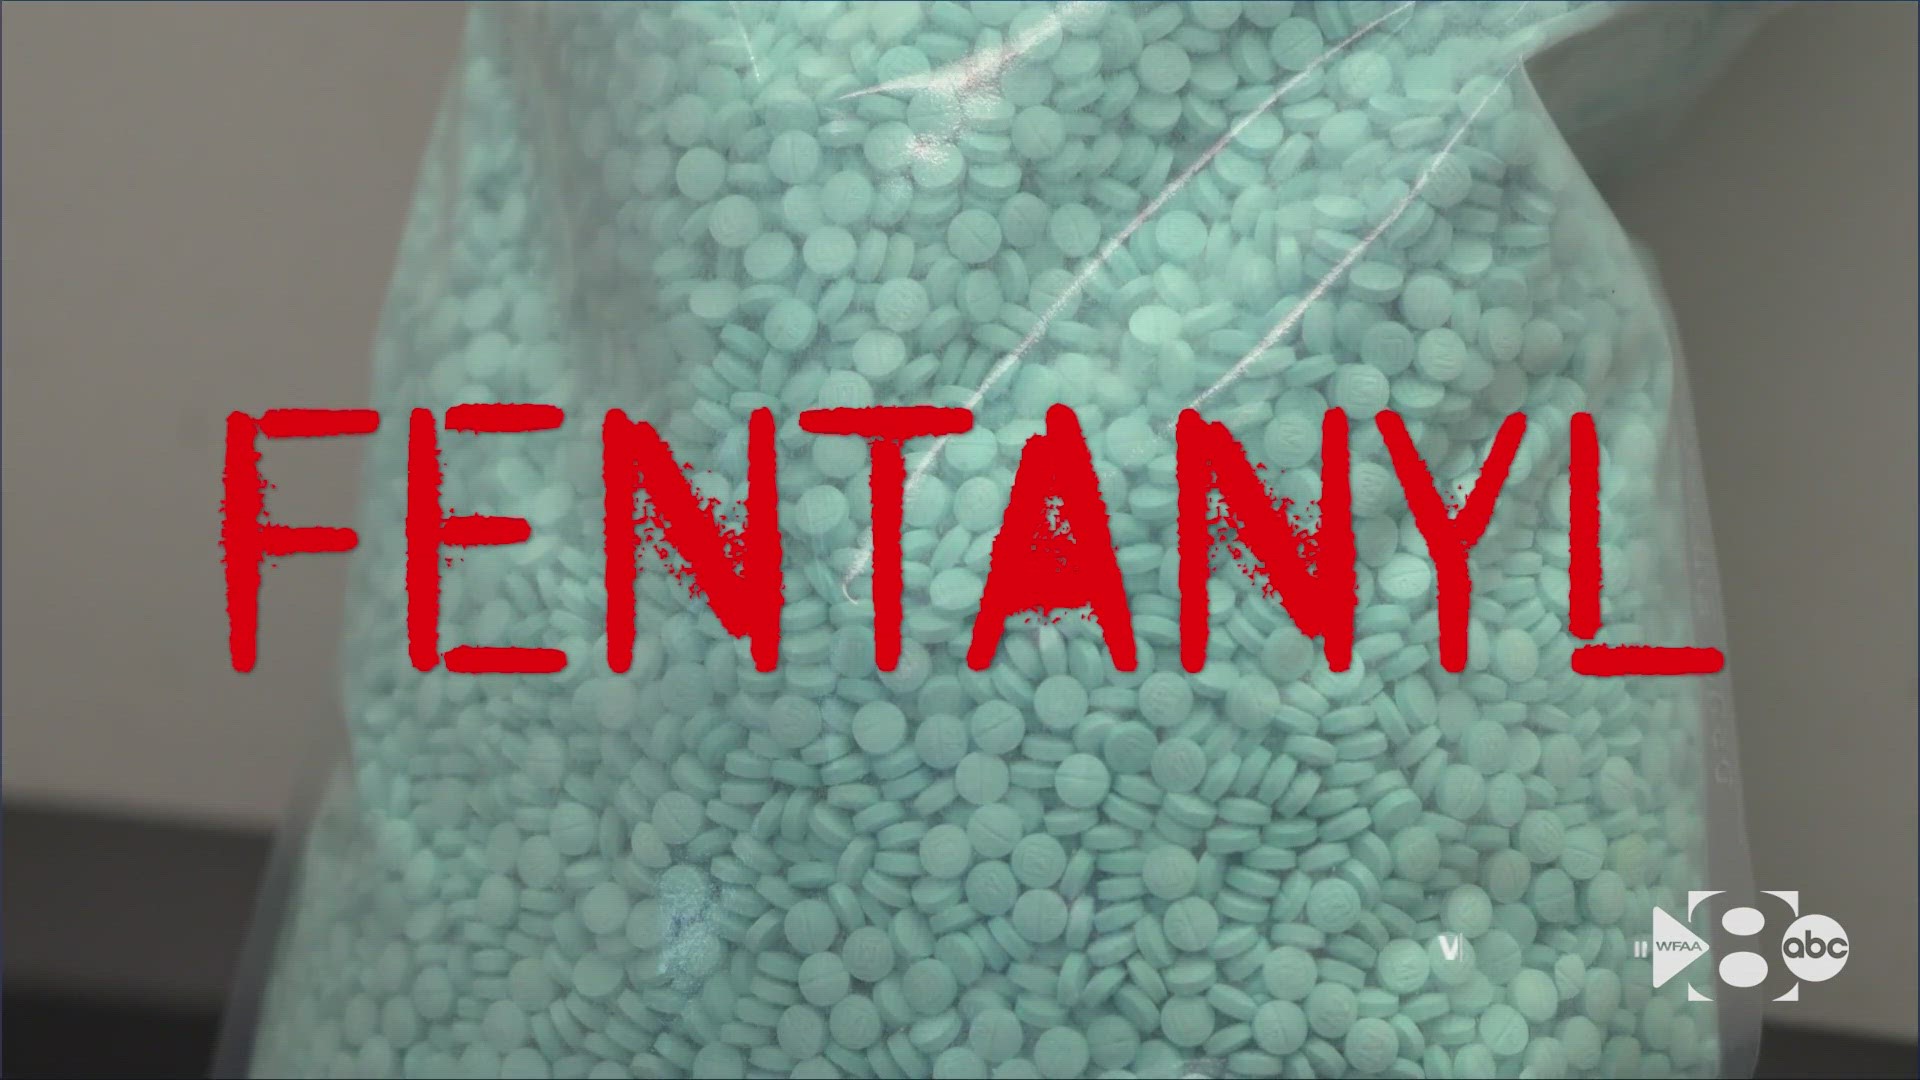 Fentanyl was not created to be used recreationally or bought and sold on the street.